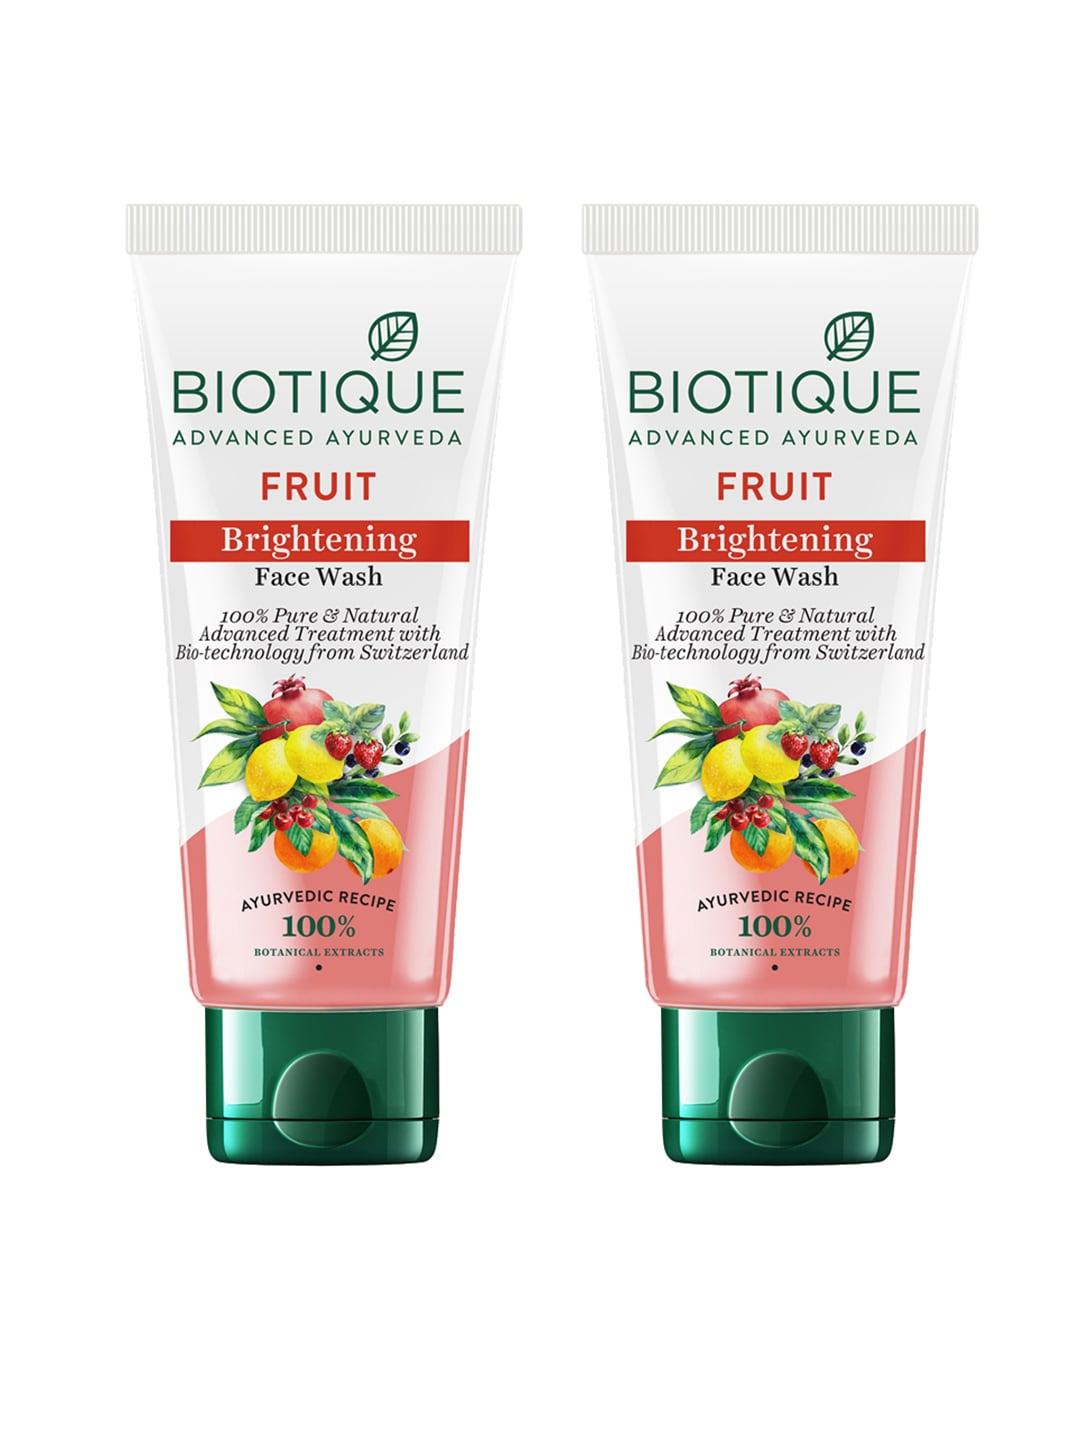 Biotique Set of 2 Pure & Natural Fruit Brightening Face Wash - 100ml each